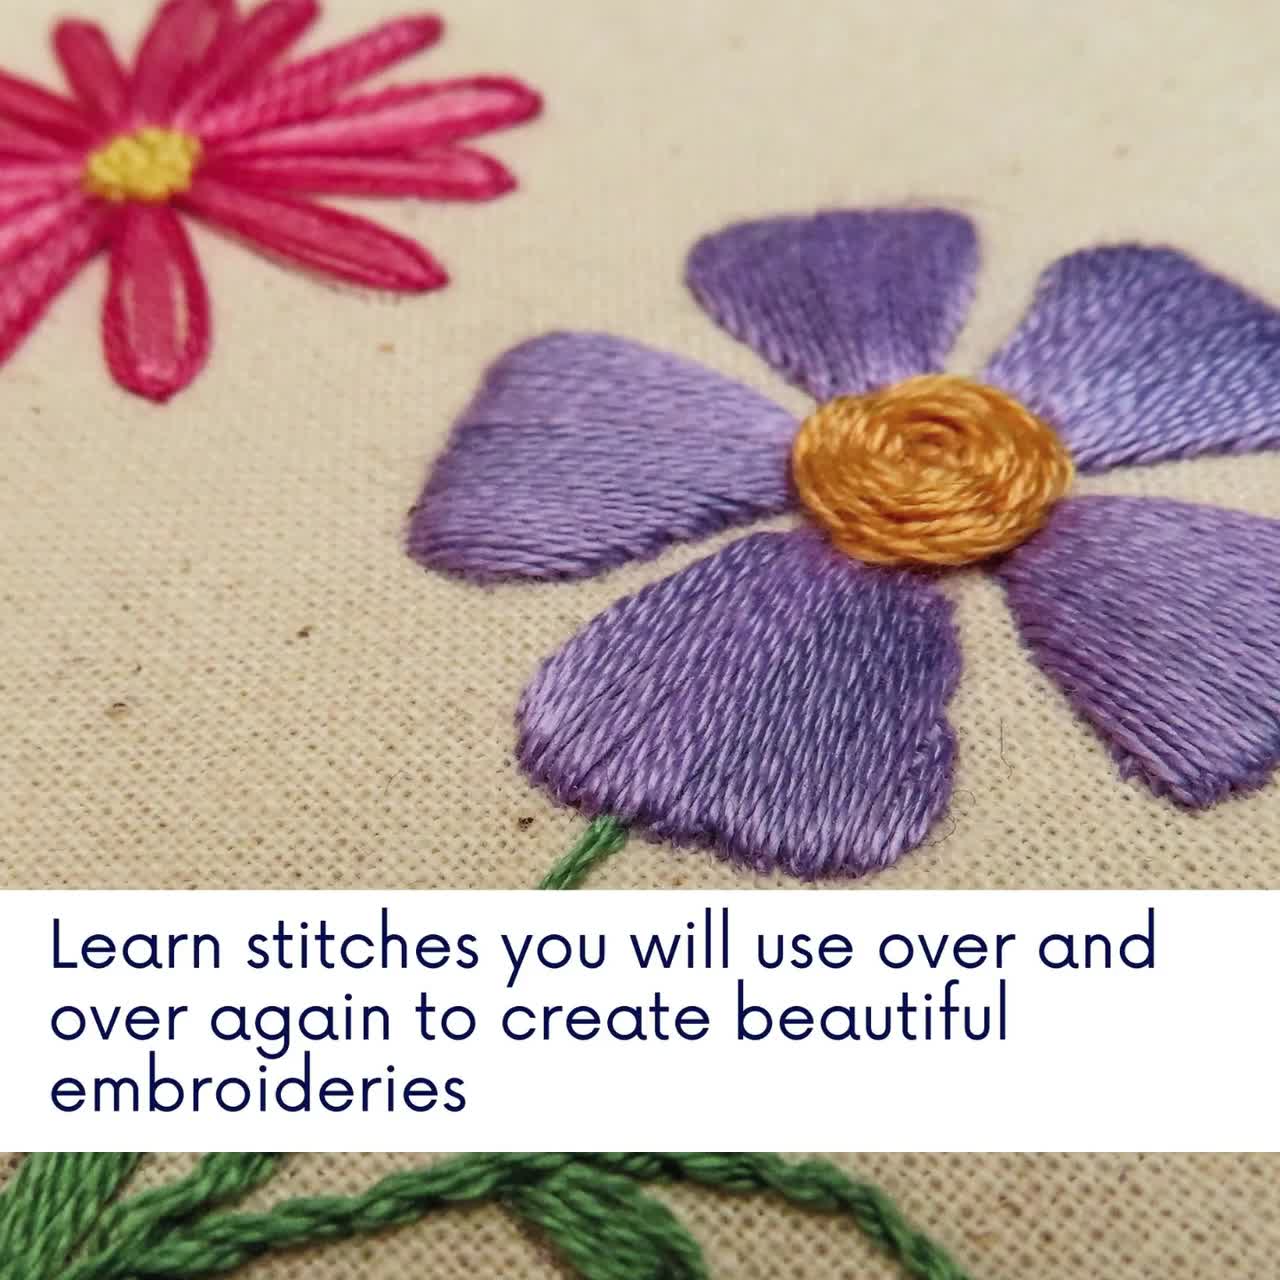 25 beautiful ways to stitch EMBROIDERY FLOWERS - SewGuide